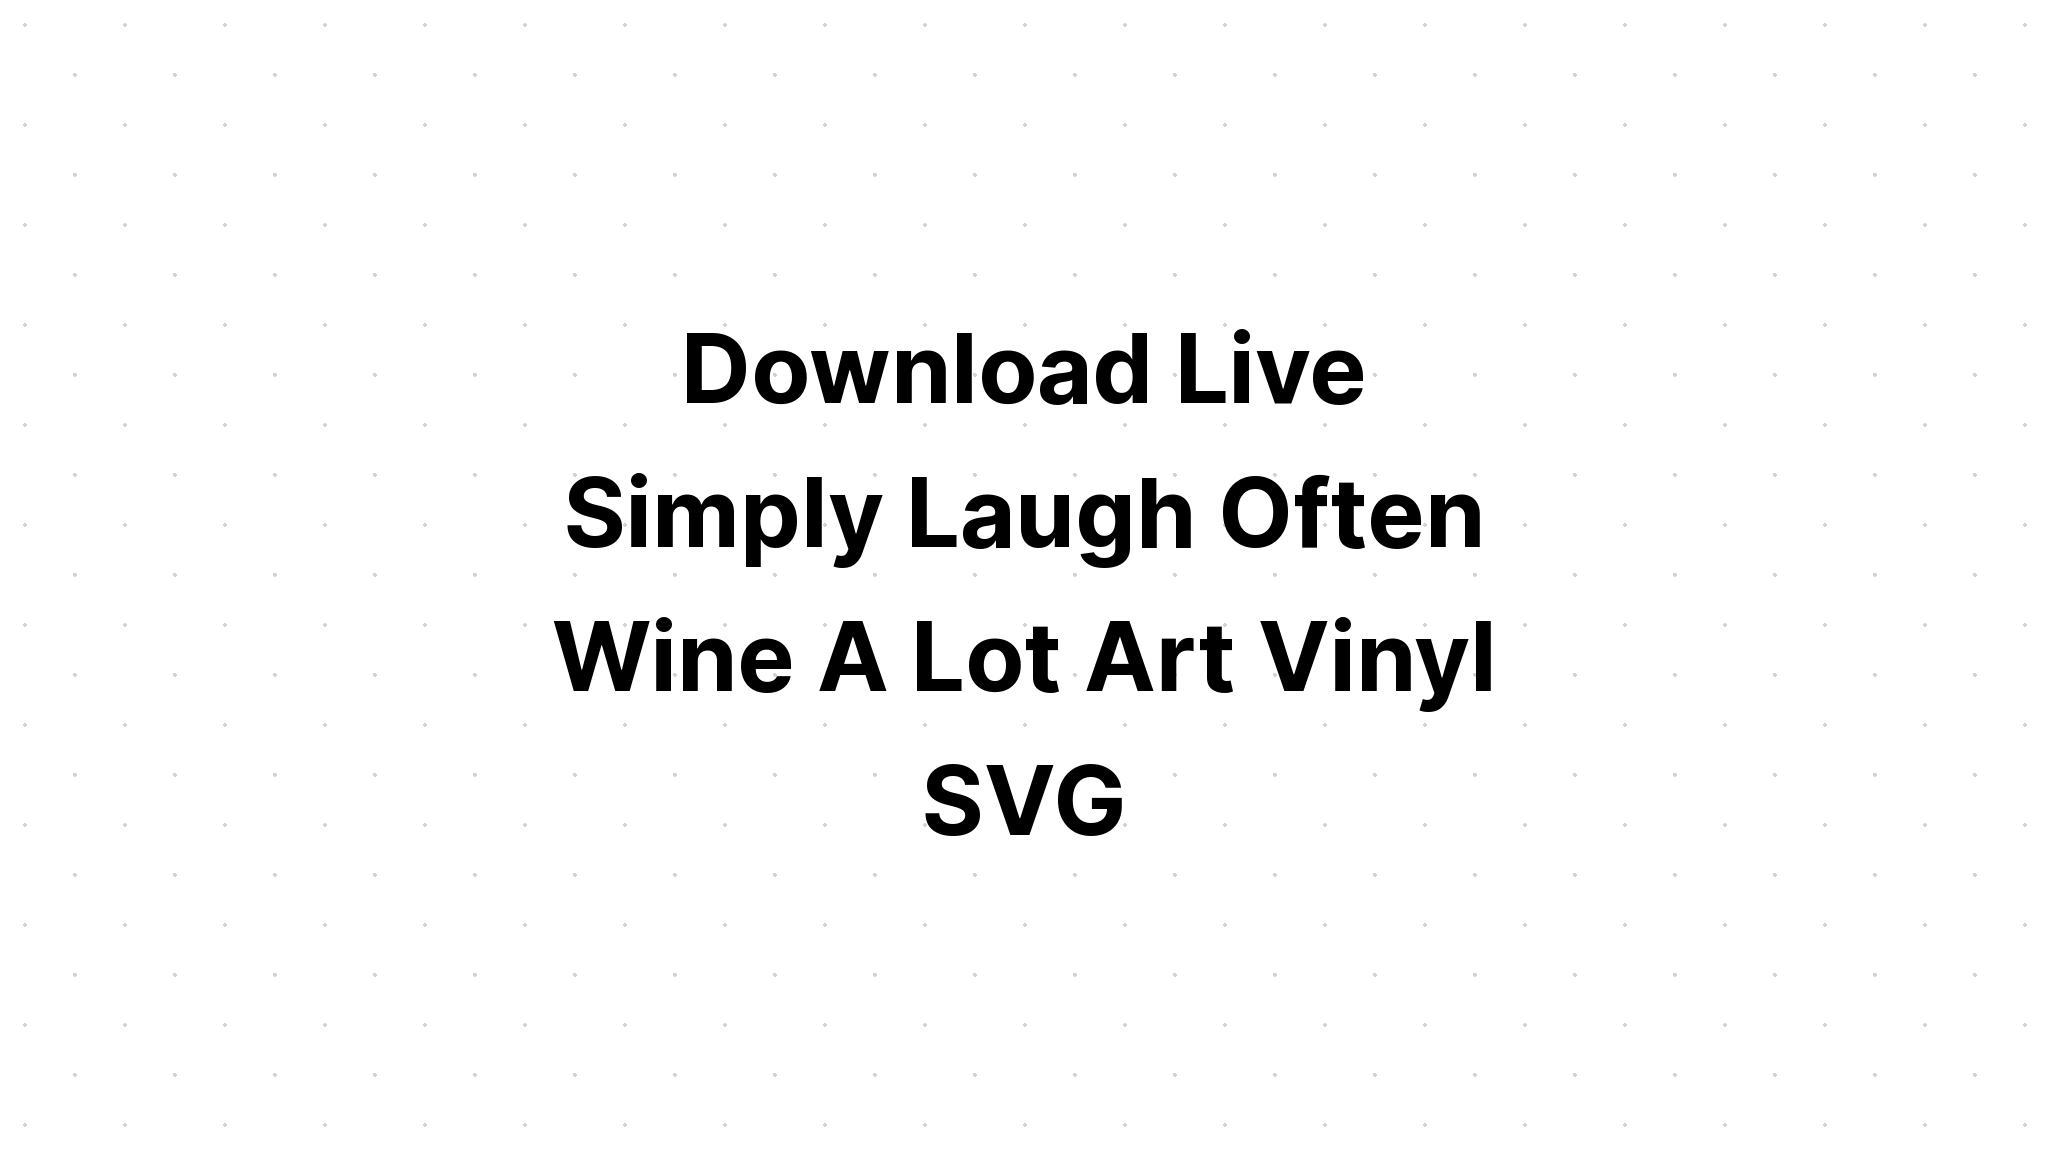 Download House Full Of Love Laughter Good Wine Svg - Layered SVG Cut File